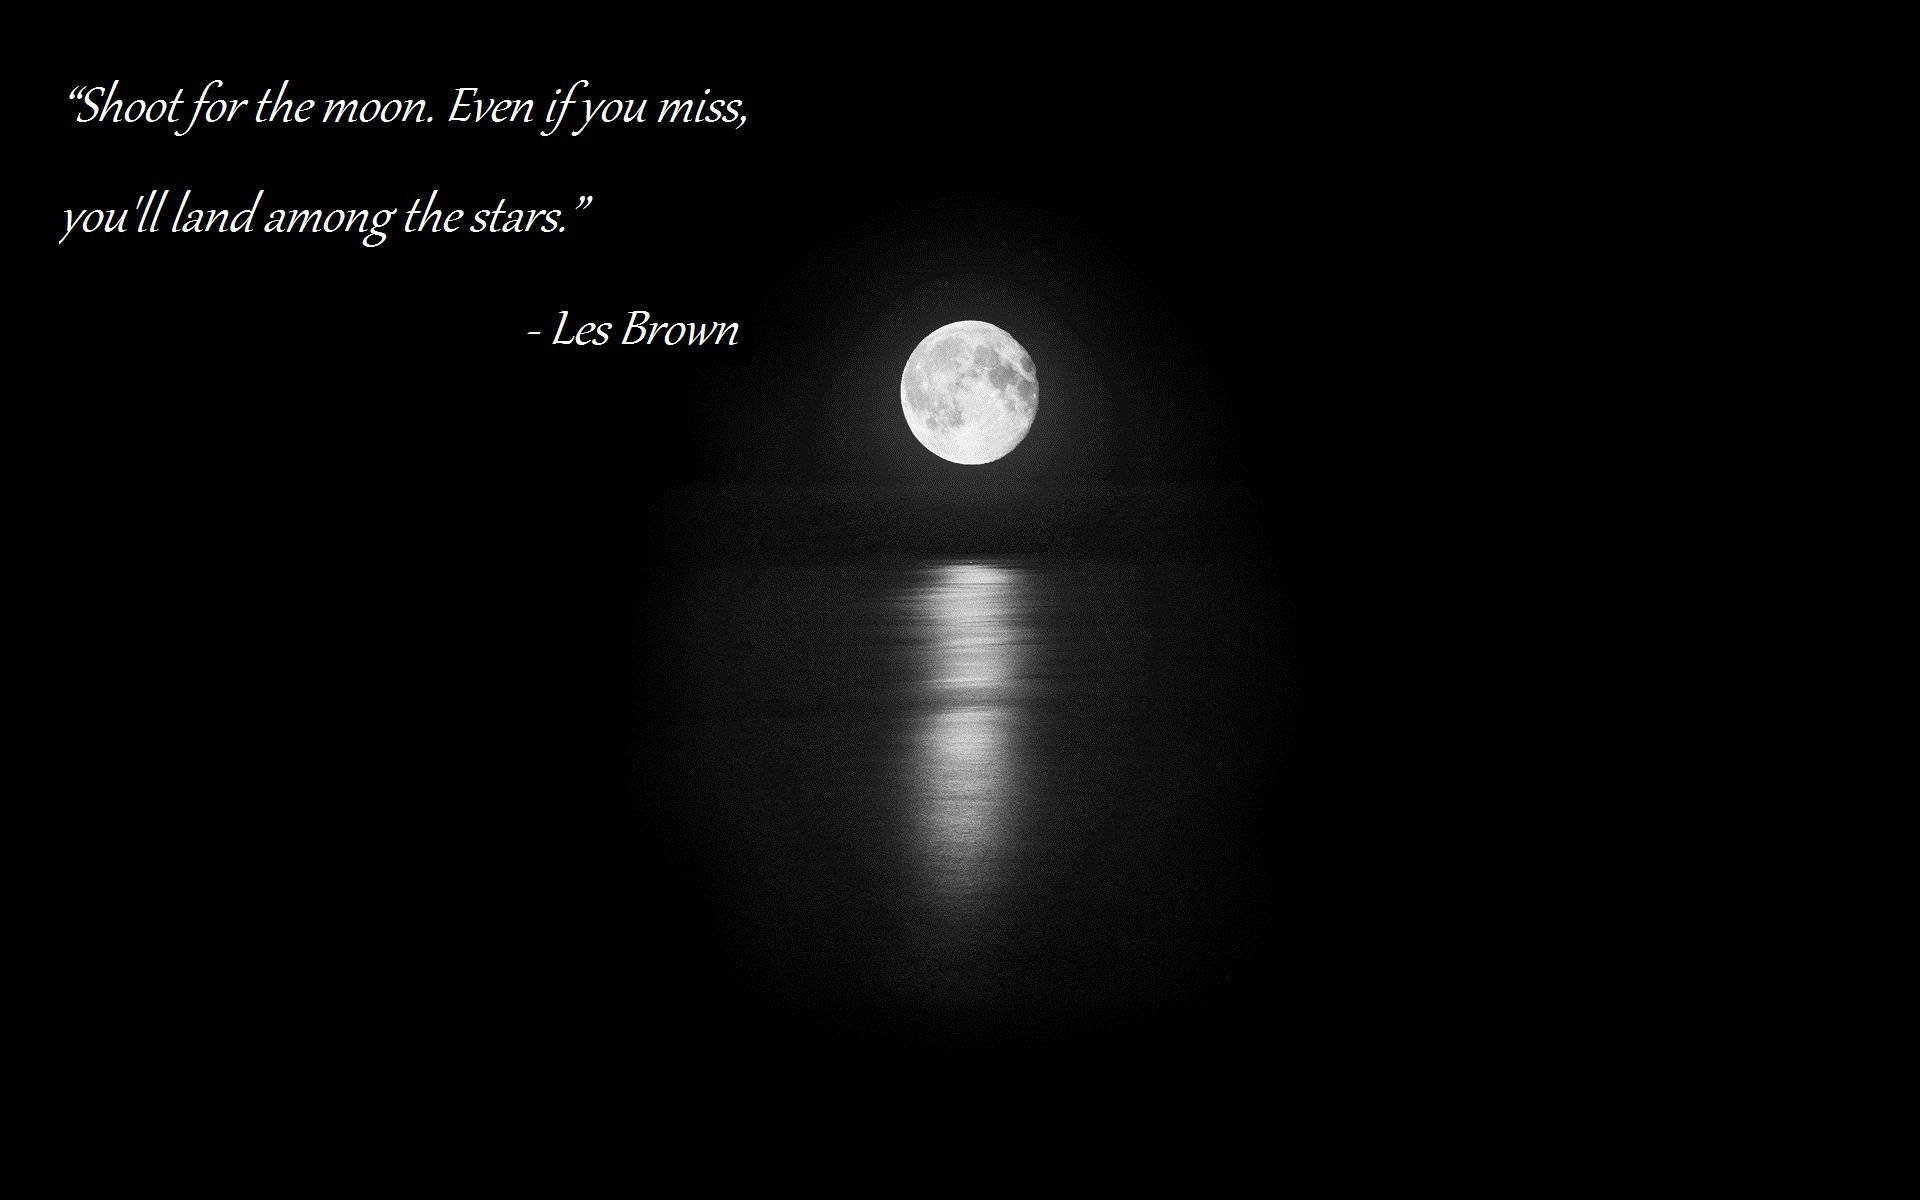 Les Brown's Moon Inspiration Background